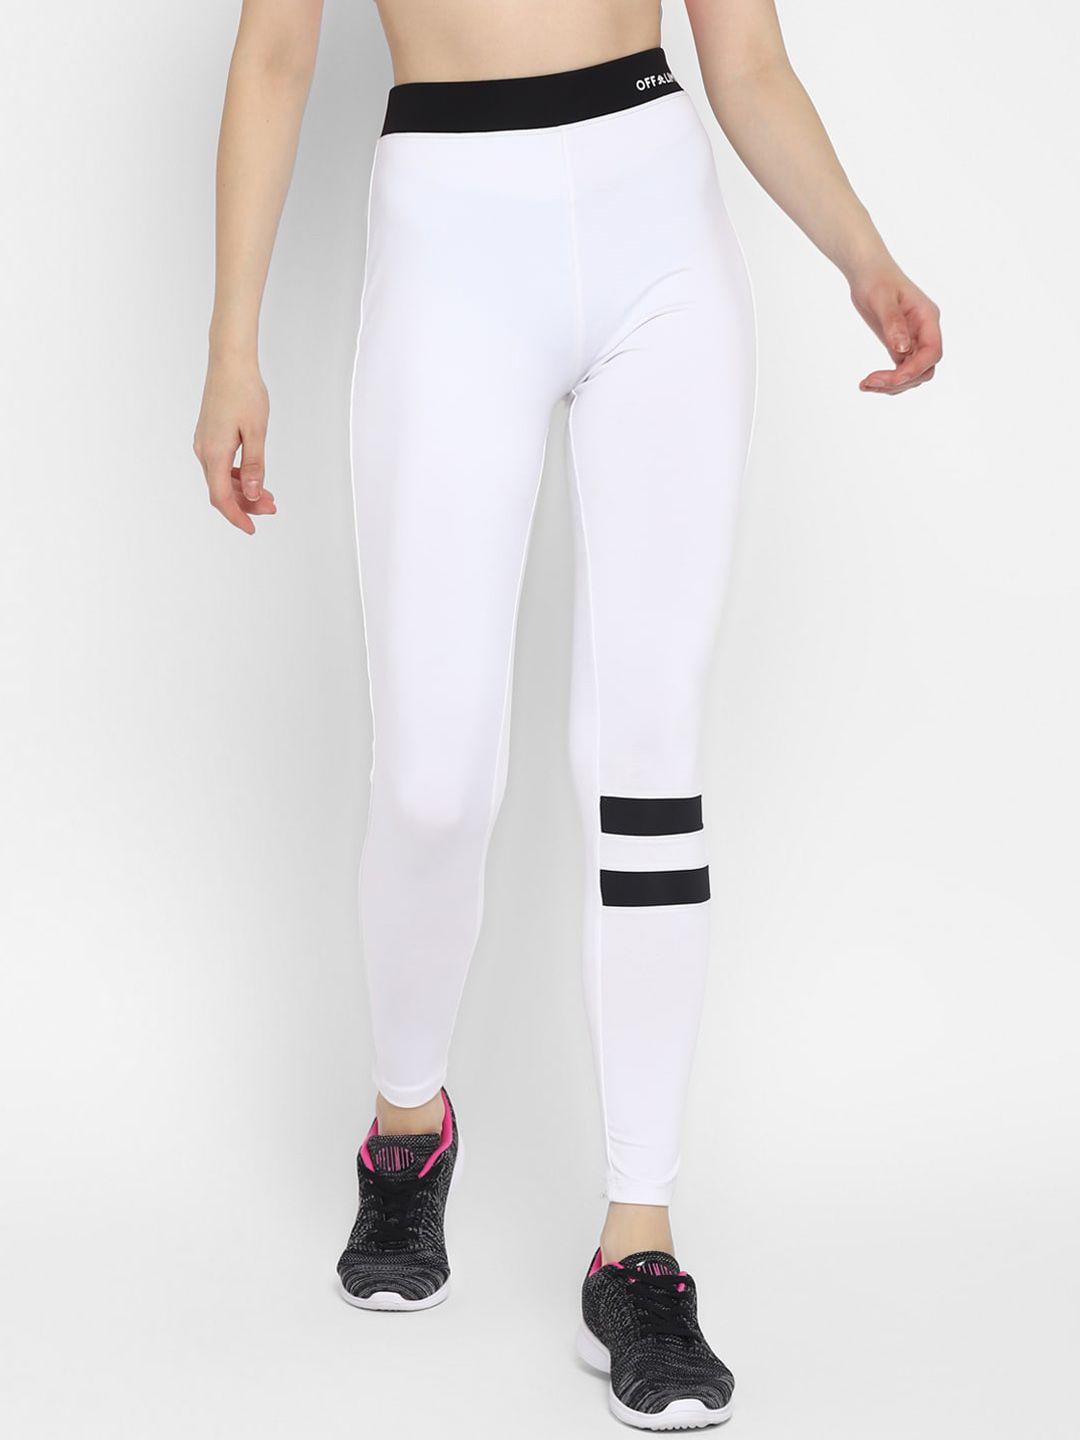 off limits women white solid tights